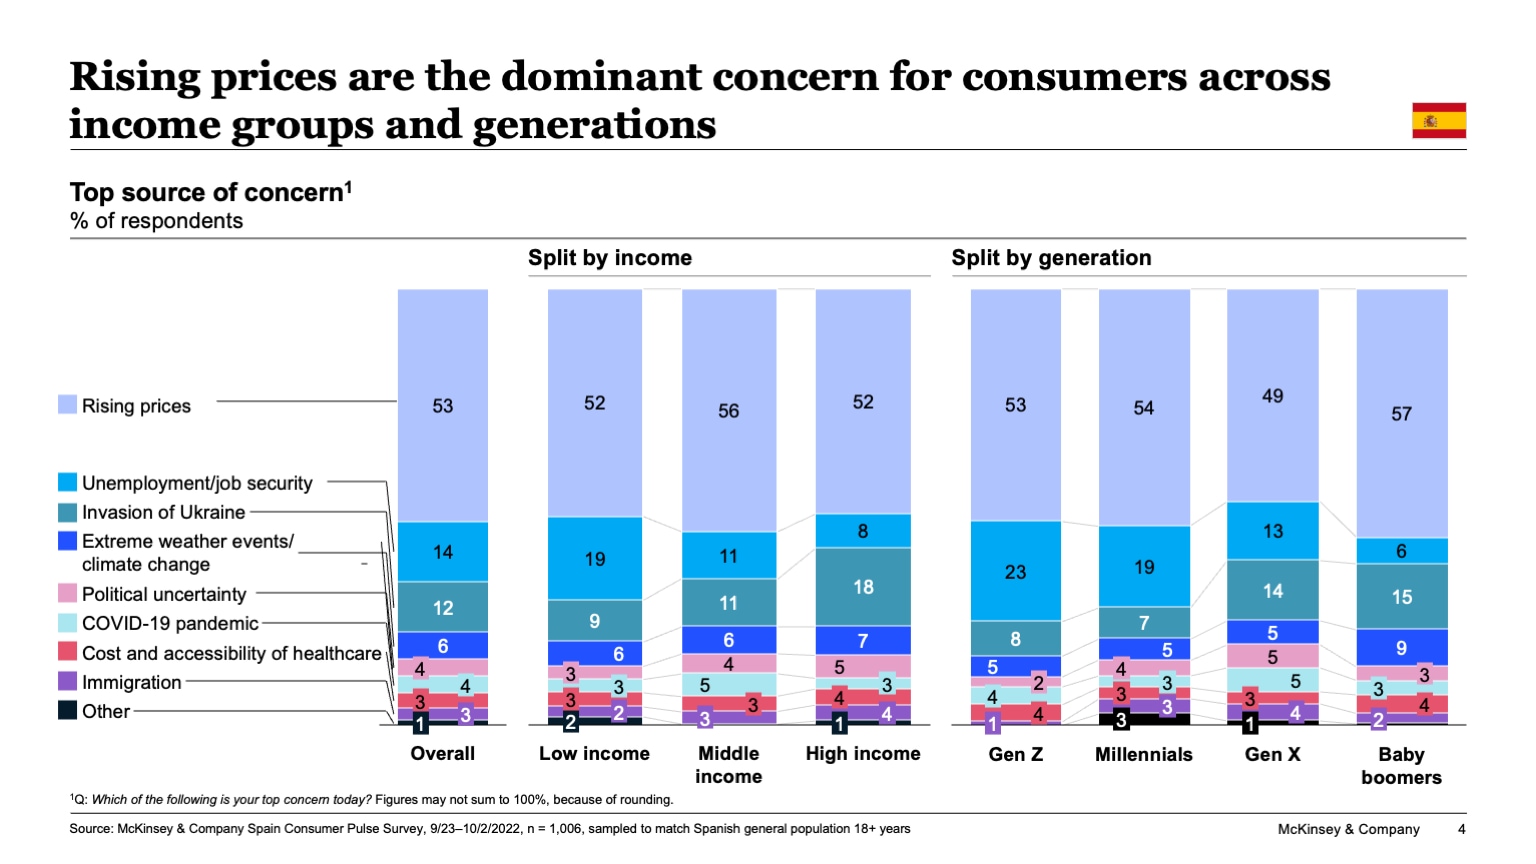 Rising prices are the dominant concern for consumers across income groups and generations